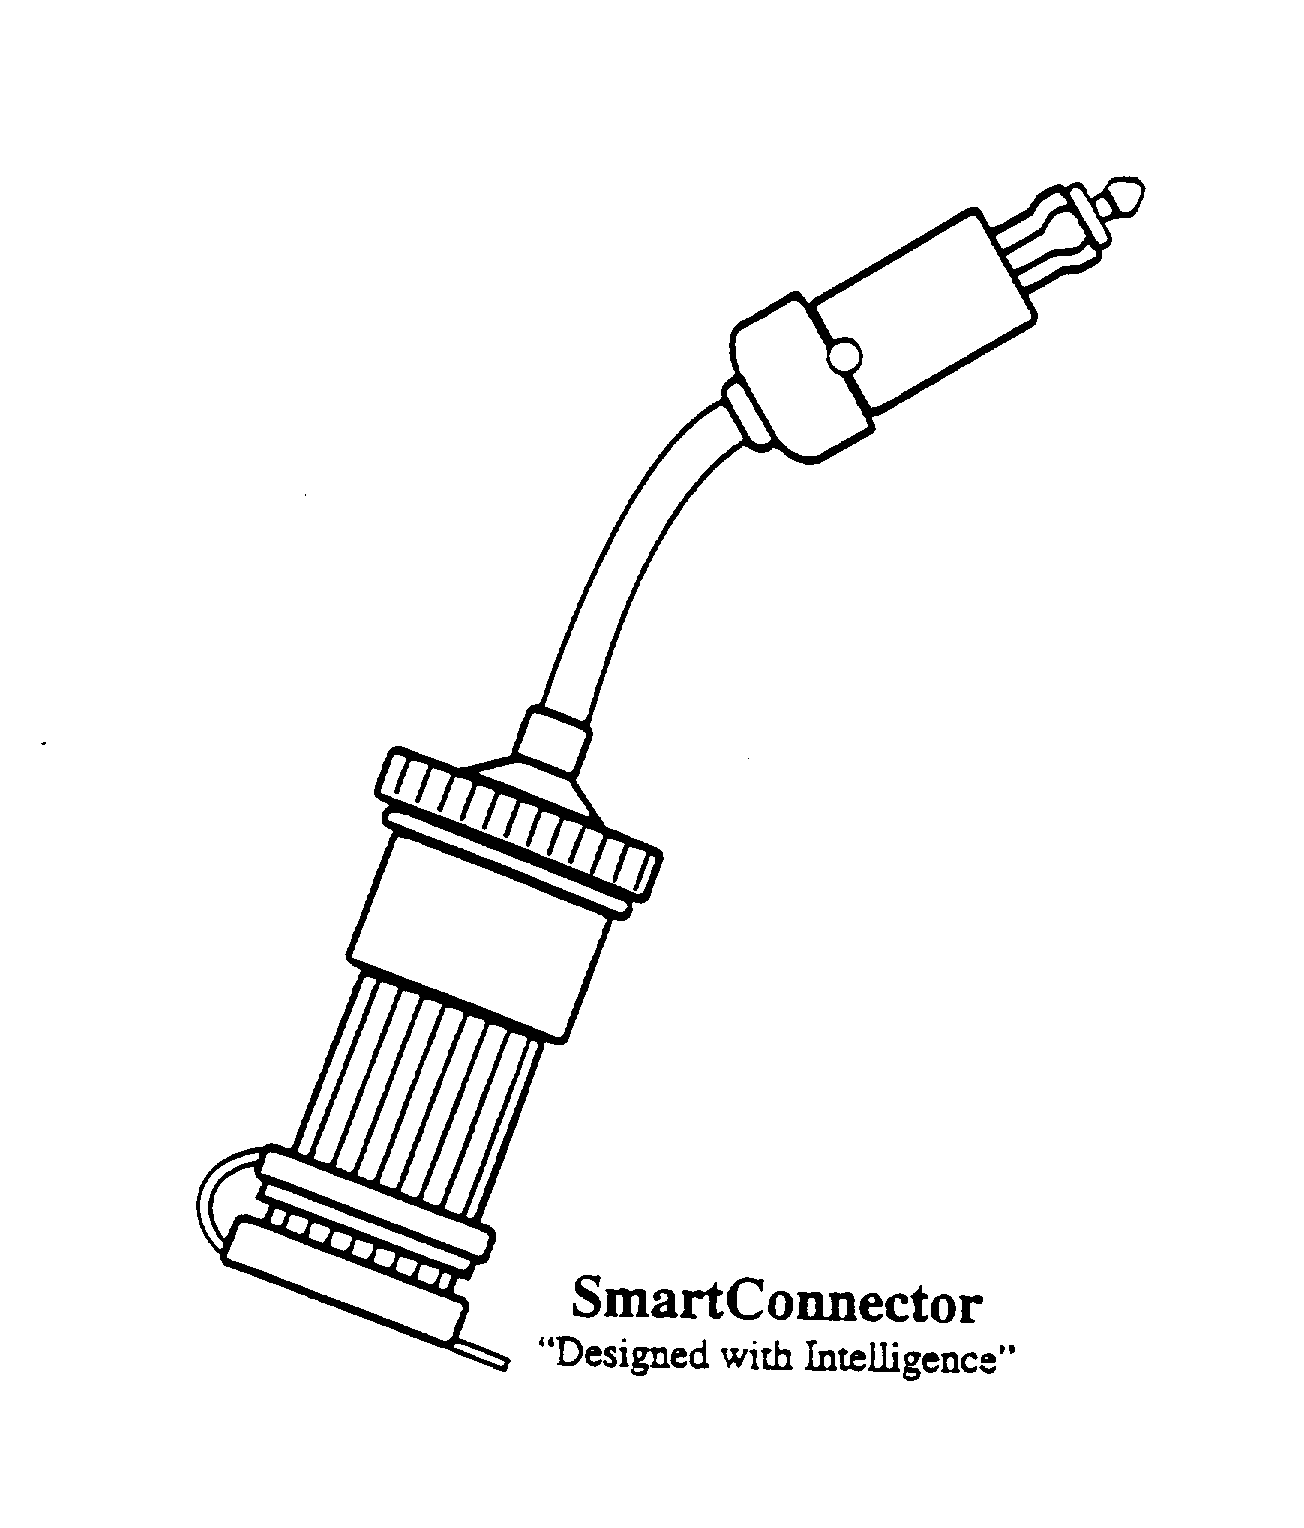  SMARTCONNECTOR "DESIGNED WITH INTELLIGENCE"